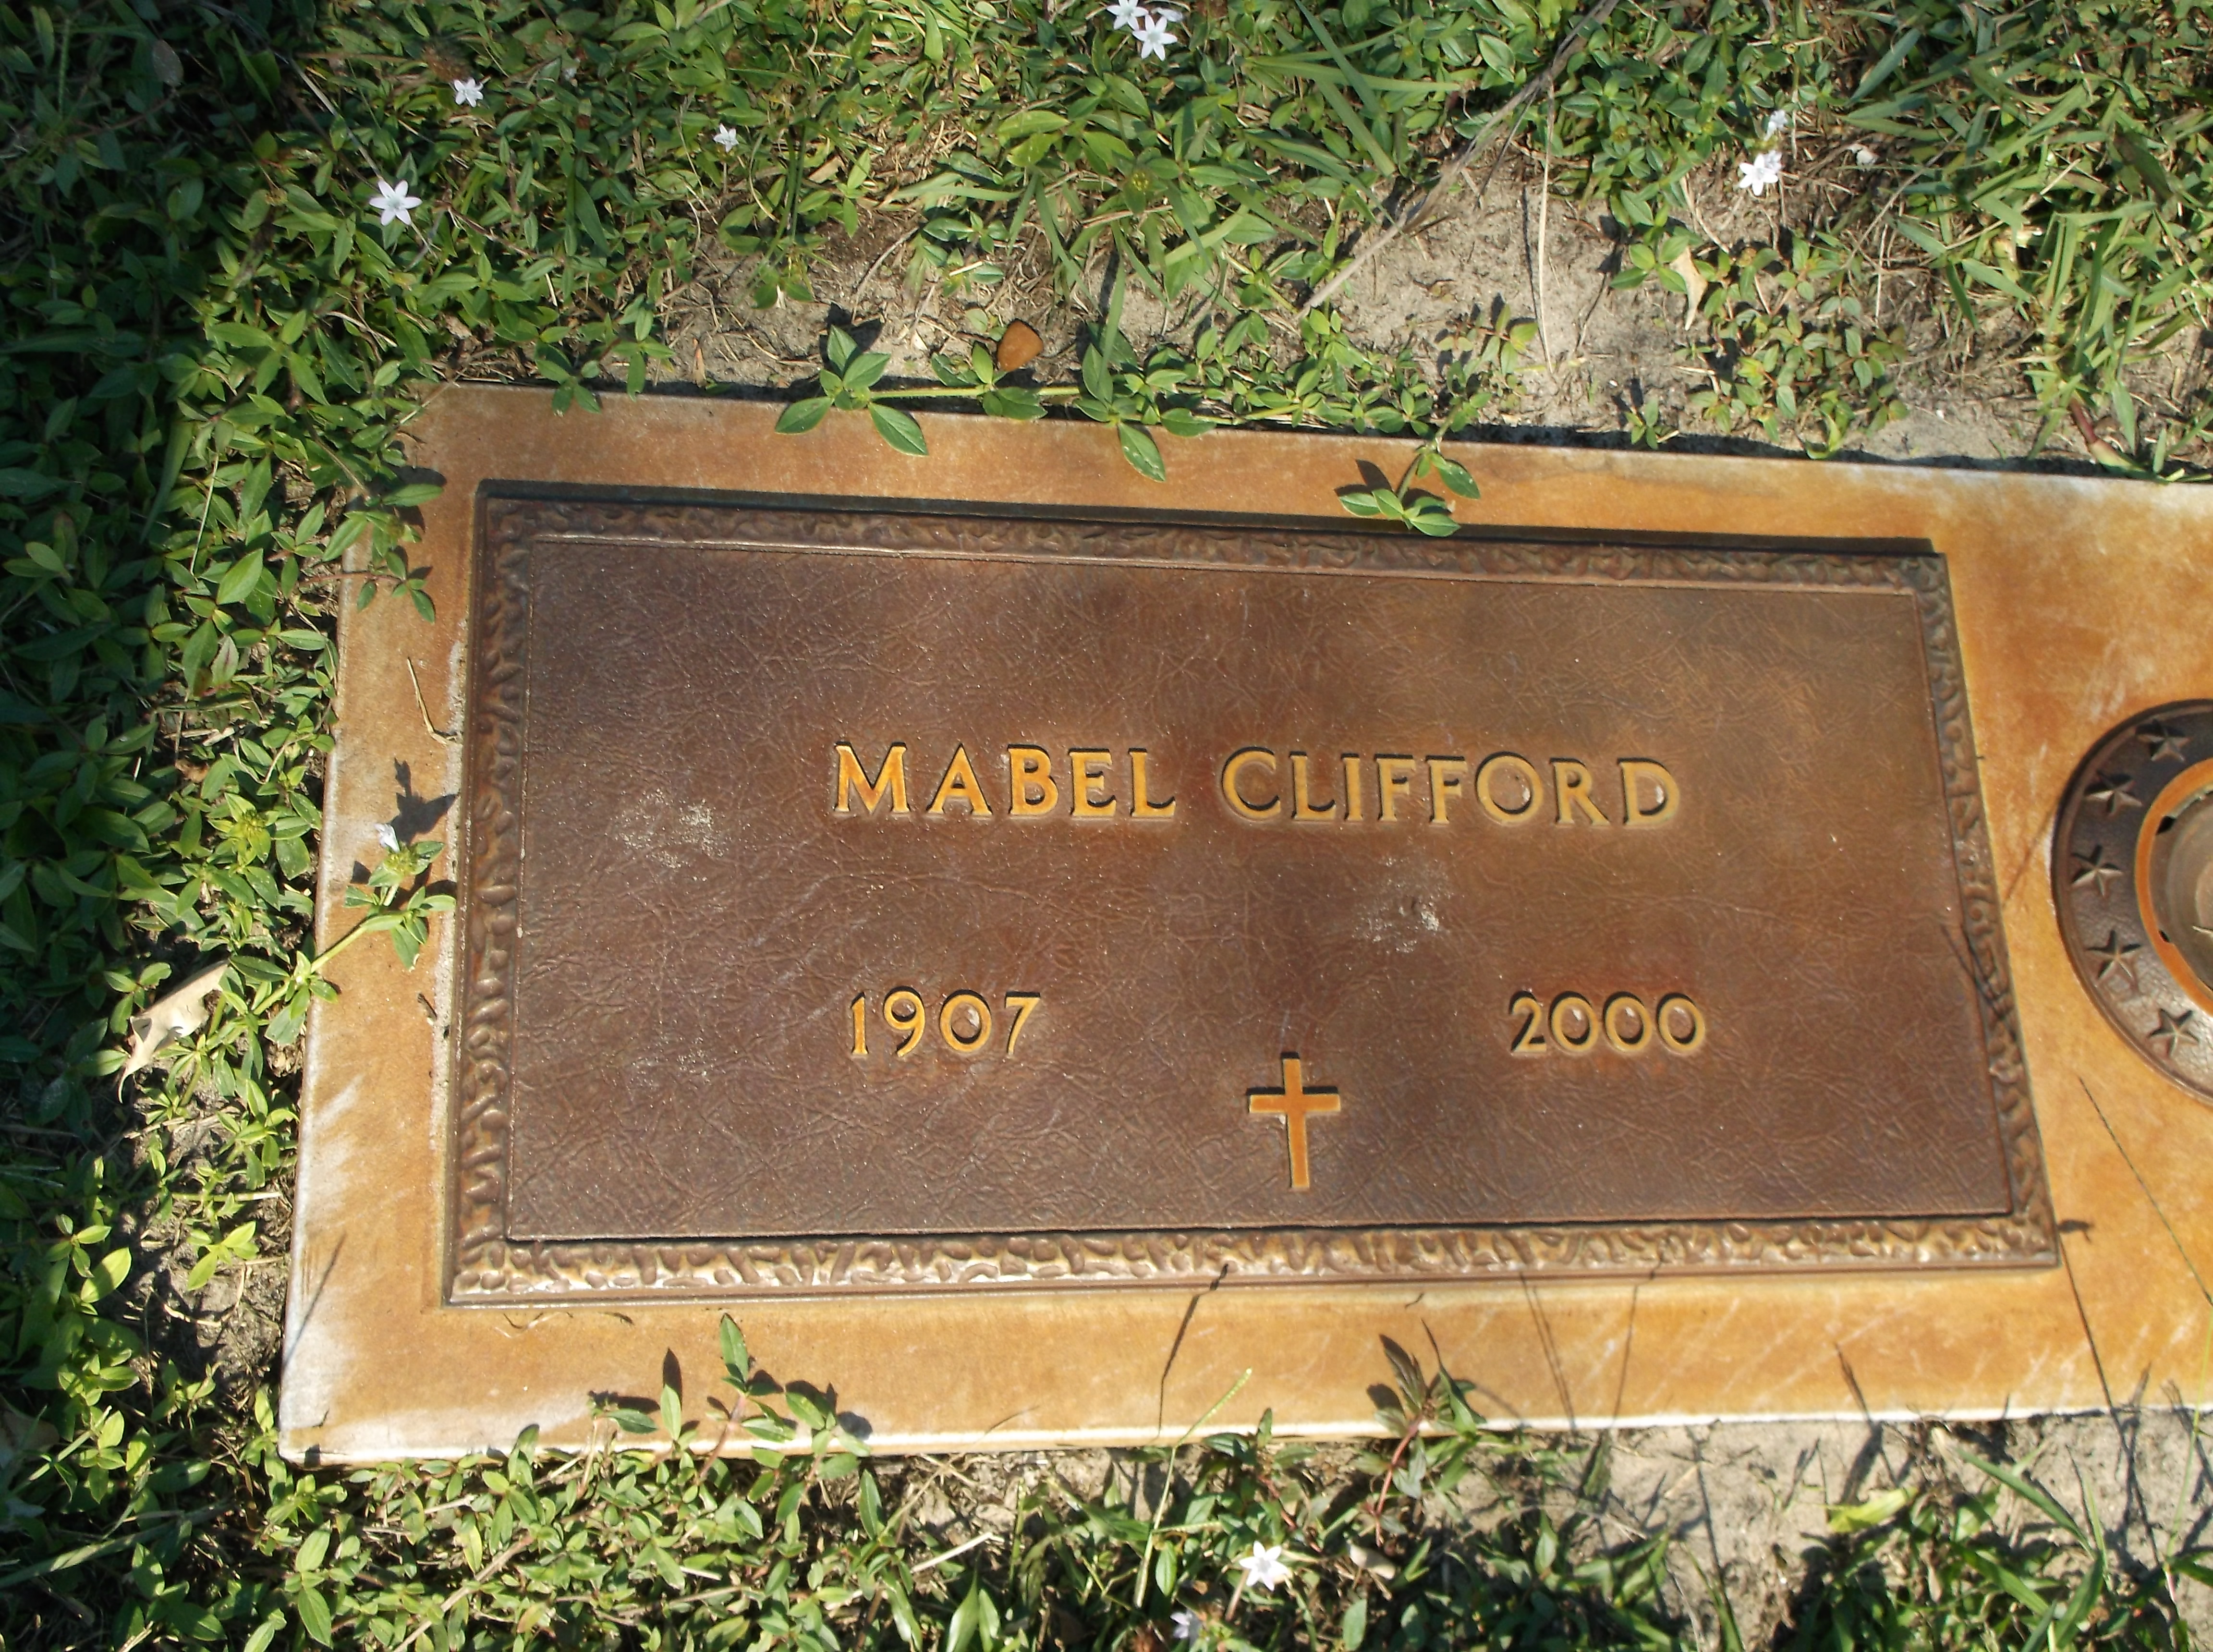 Mabel Clifford